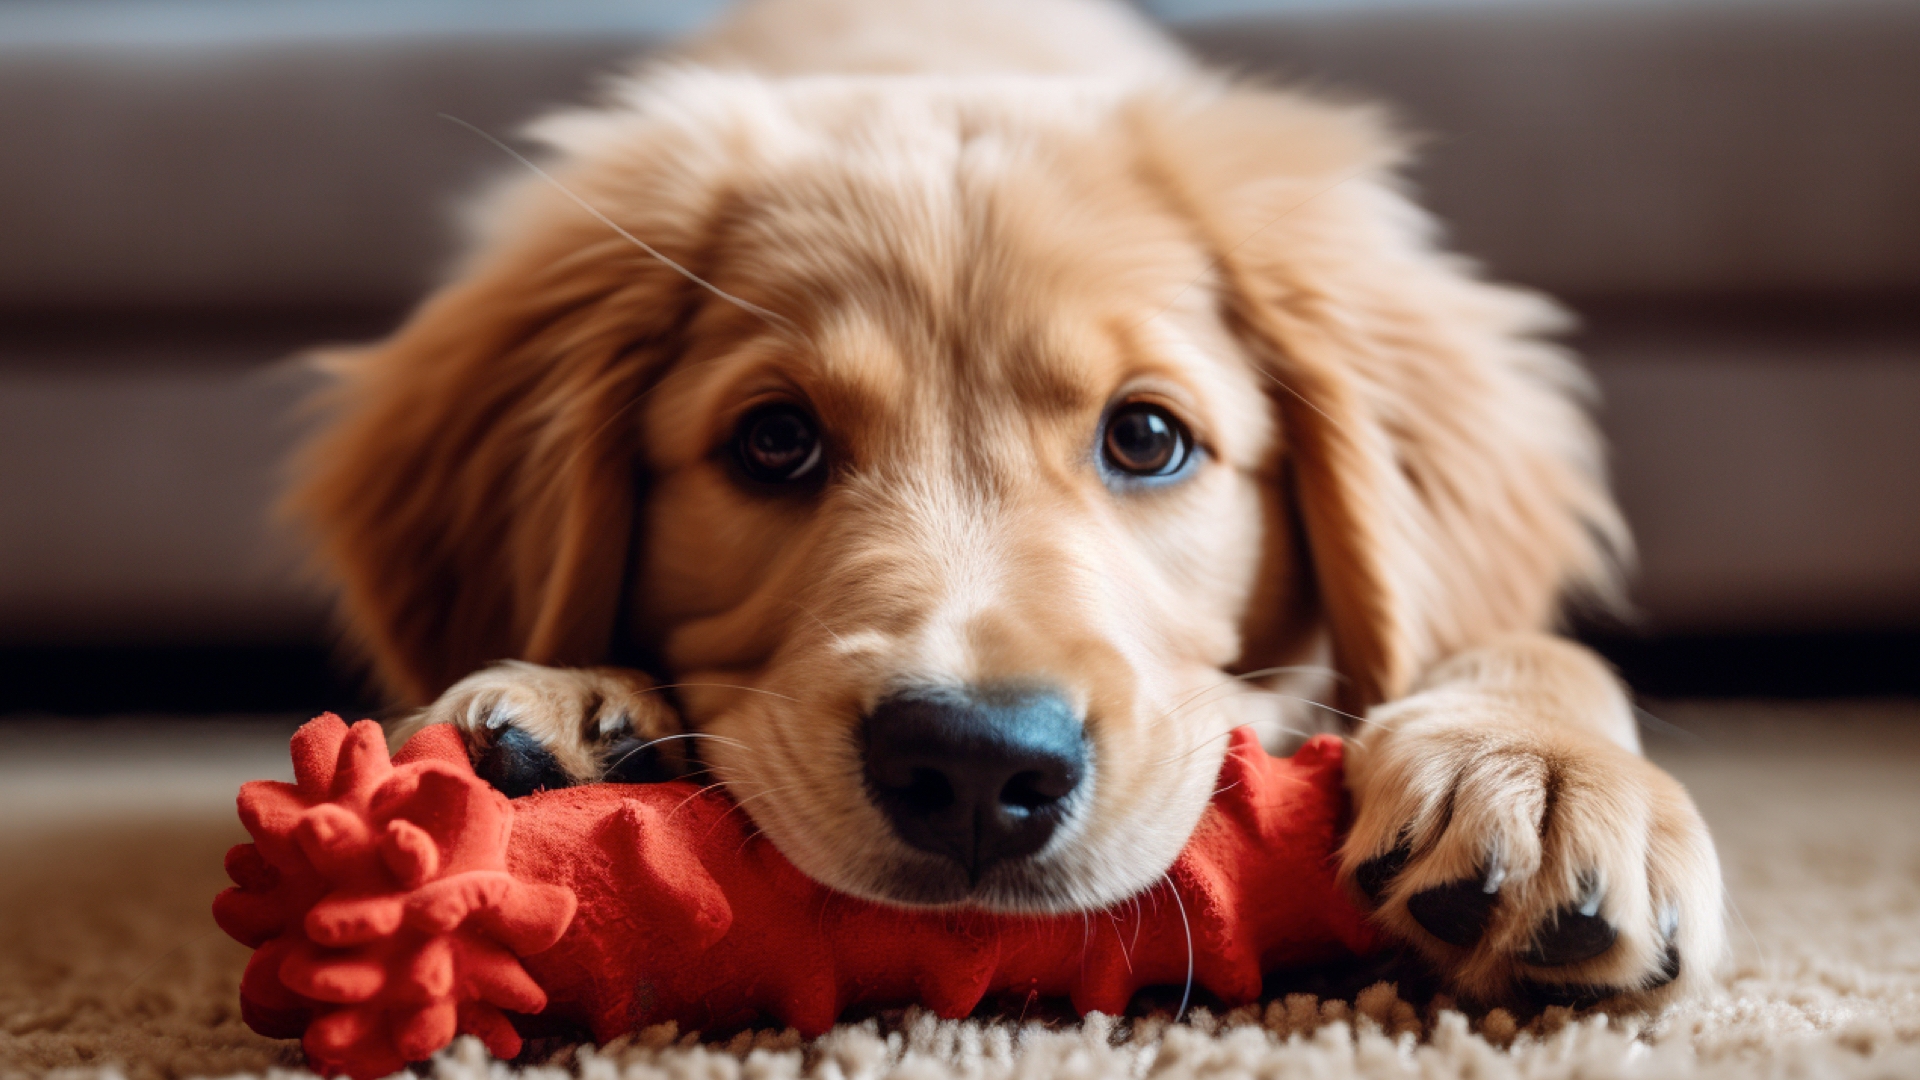 From Frisbees to Chew Toys, Making Safe Play Choices for Your Pup